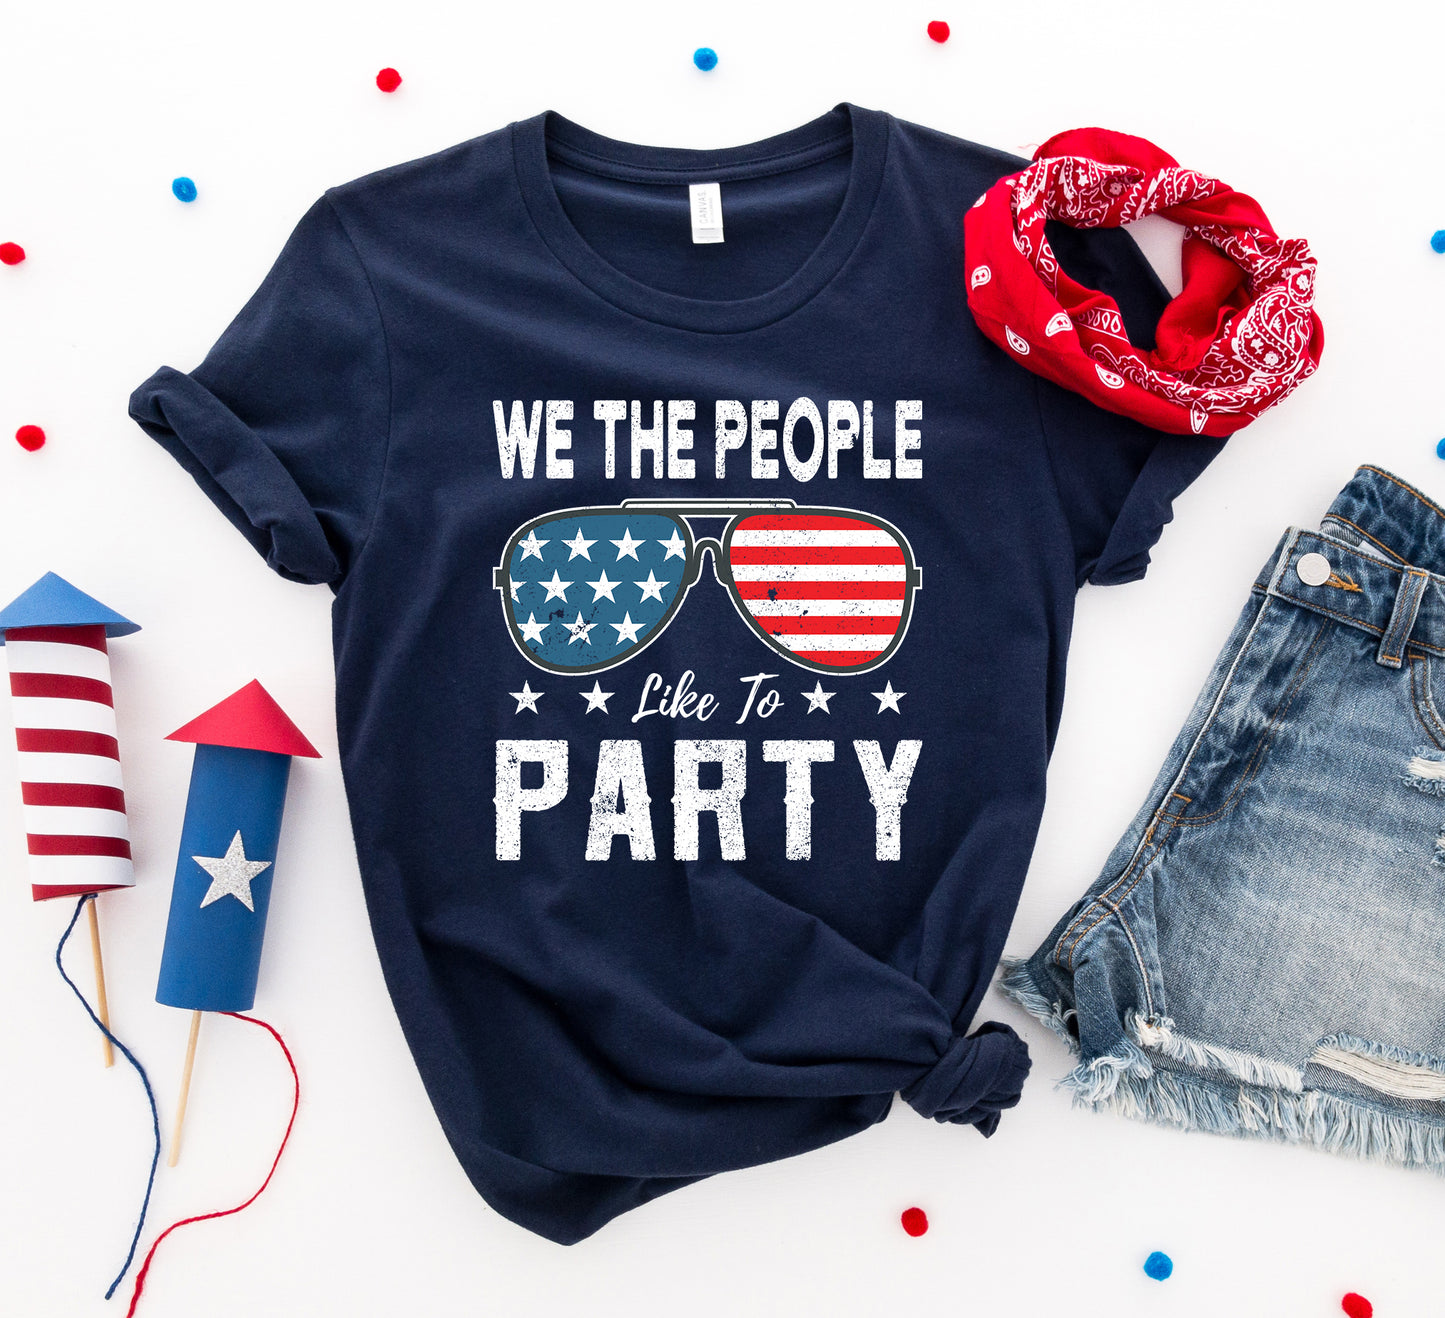 We the people like to party T-shirt